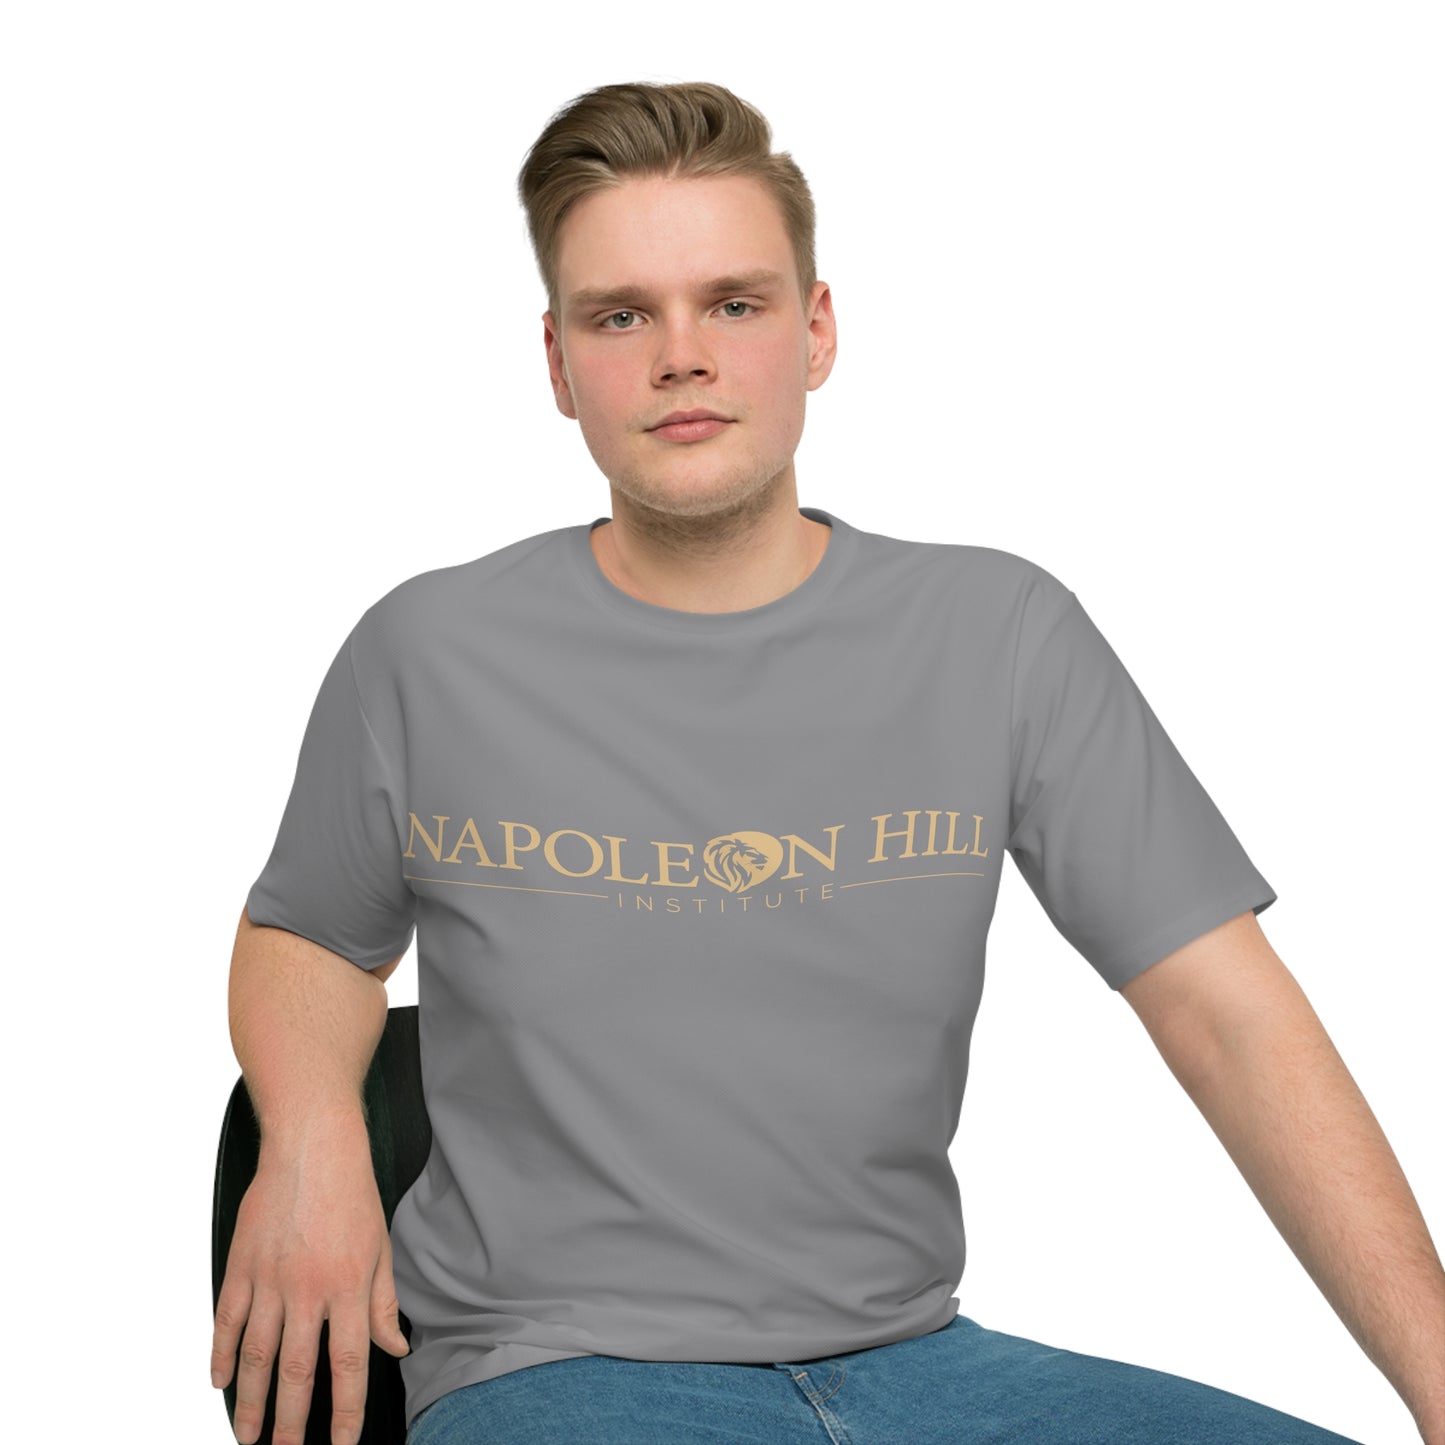 Napoleon Hill Institute T-shirt for Men (US shipping)